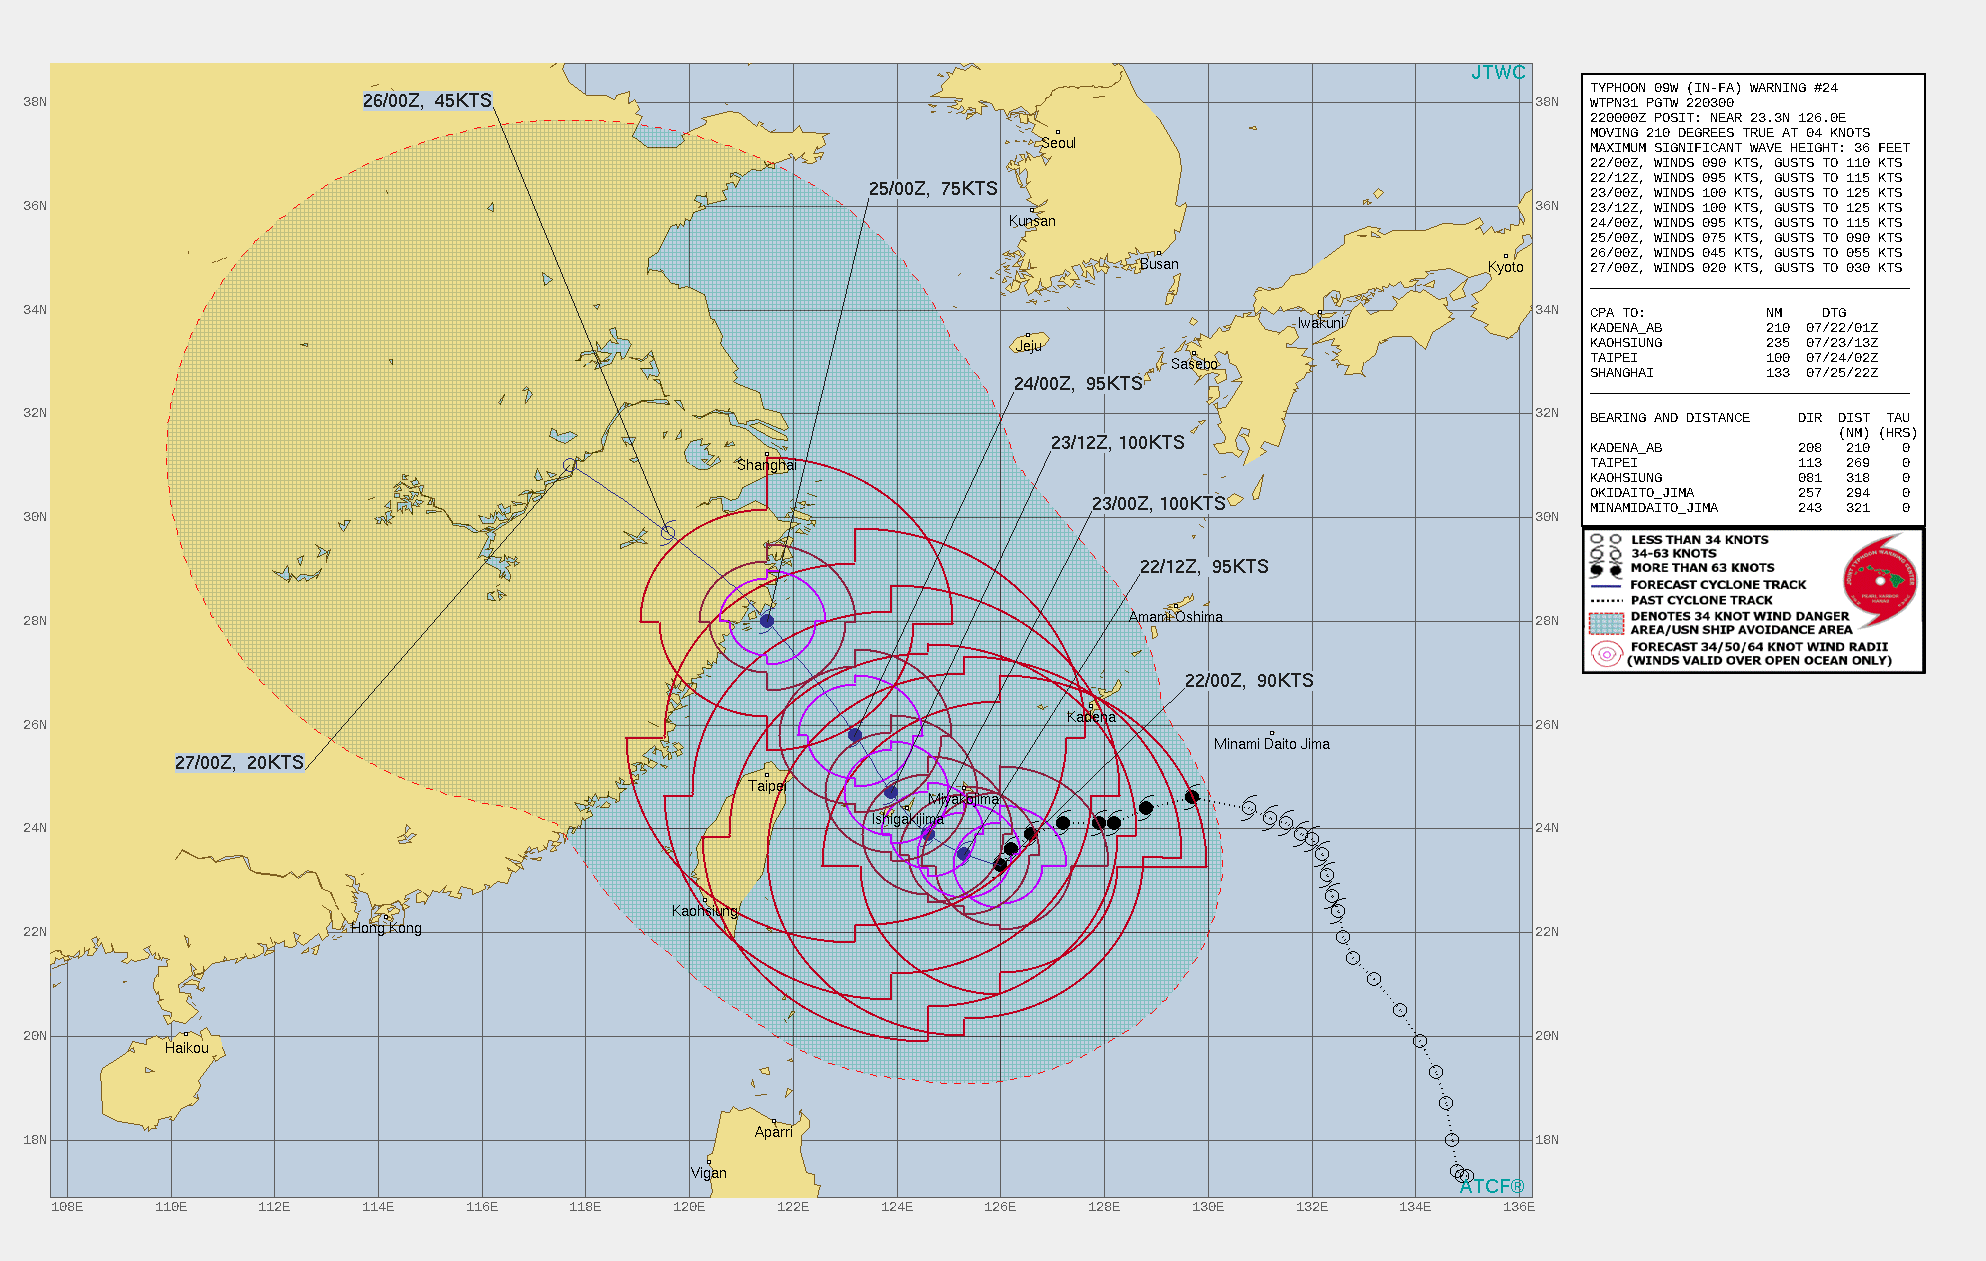 09W(IN-FA). WARNING 24 ISSUED AT 22/03UTC.THERE ARE NO SIGNIFICANT CHANGES TO THE FORECAST FROM THE PREVIOUS WARNING.  FORECAST DISCUSSION: A STRONG UPPER LEVEL HEIGHT CENTER PEAKING OVER THE SEA OF JAPAN HAS FORCED THE SYSTEM A LITTLE EQUATORWARD OF THE EXPECTED TRACK OVER THE PAST SIX HOURS BUT THE PRESSURE IS BEGINNING TO LIFT AND TY 09W WILL BEND POLEWARD IN THE NEAR FUTURE. ONCE ON ITS NORTHWESTWARD LEG, IT WILL ROAR OVER ISHIGAKIJIMA AT ITS PEAK INTENSITY OF 100KTS/CAT 3. BEYOND THE SENKAKUS SEA SURFACE TEMPERATURES WILL COOL SLIGHTLY AND WIND SHEAR WILL INCREASE, SENDING THE SYSTEM ON A PERMANENT DOWNWARD INTENSITY TREND UNTIL ITS LANDFALL SOUTH OF SHANGHAI.